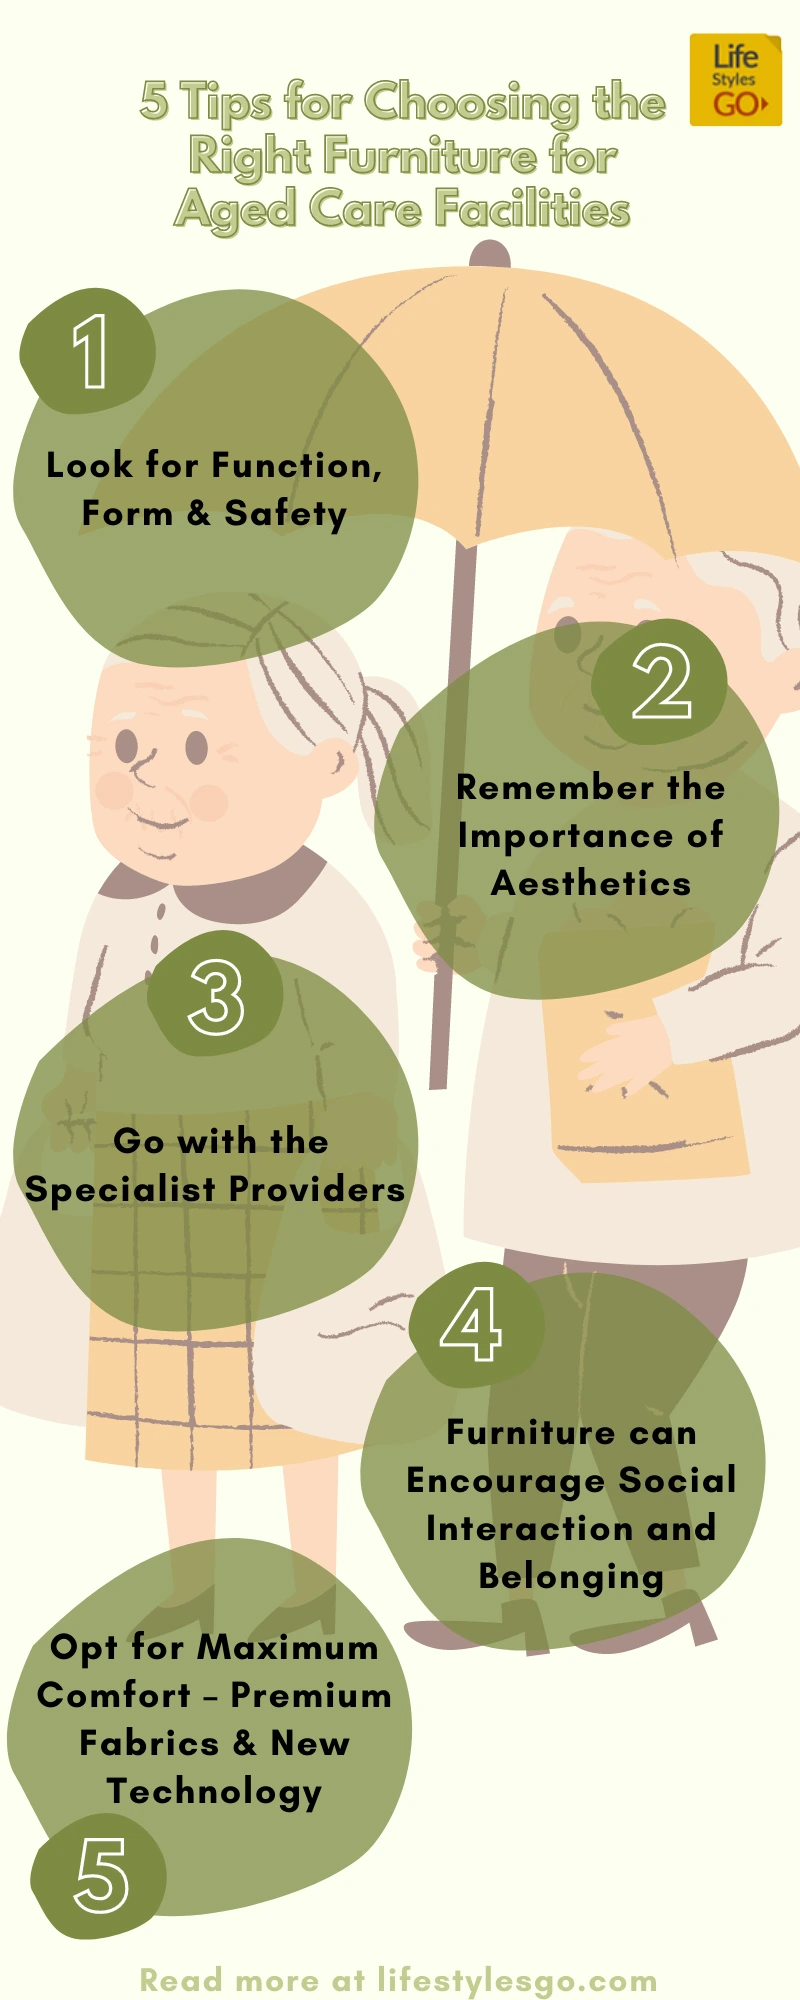 5 Tips for Choosing the Right Furniture for Aged Care Facilities Infographic